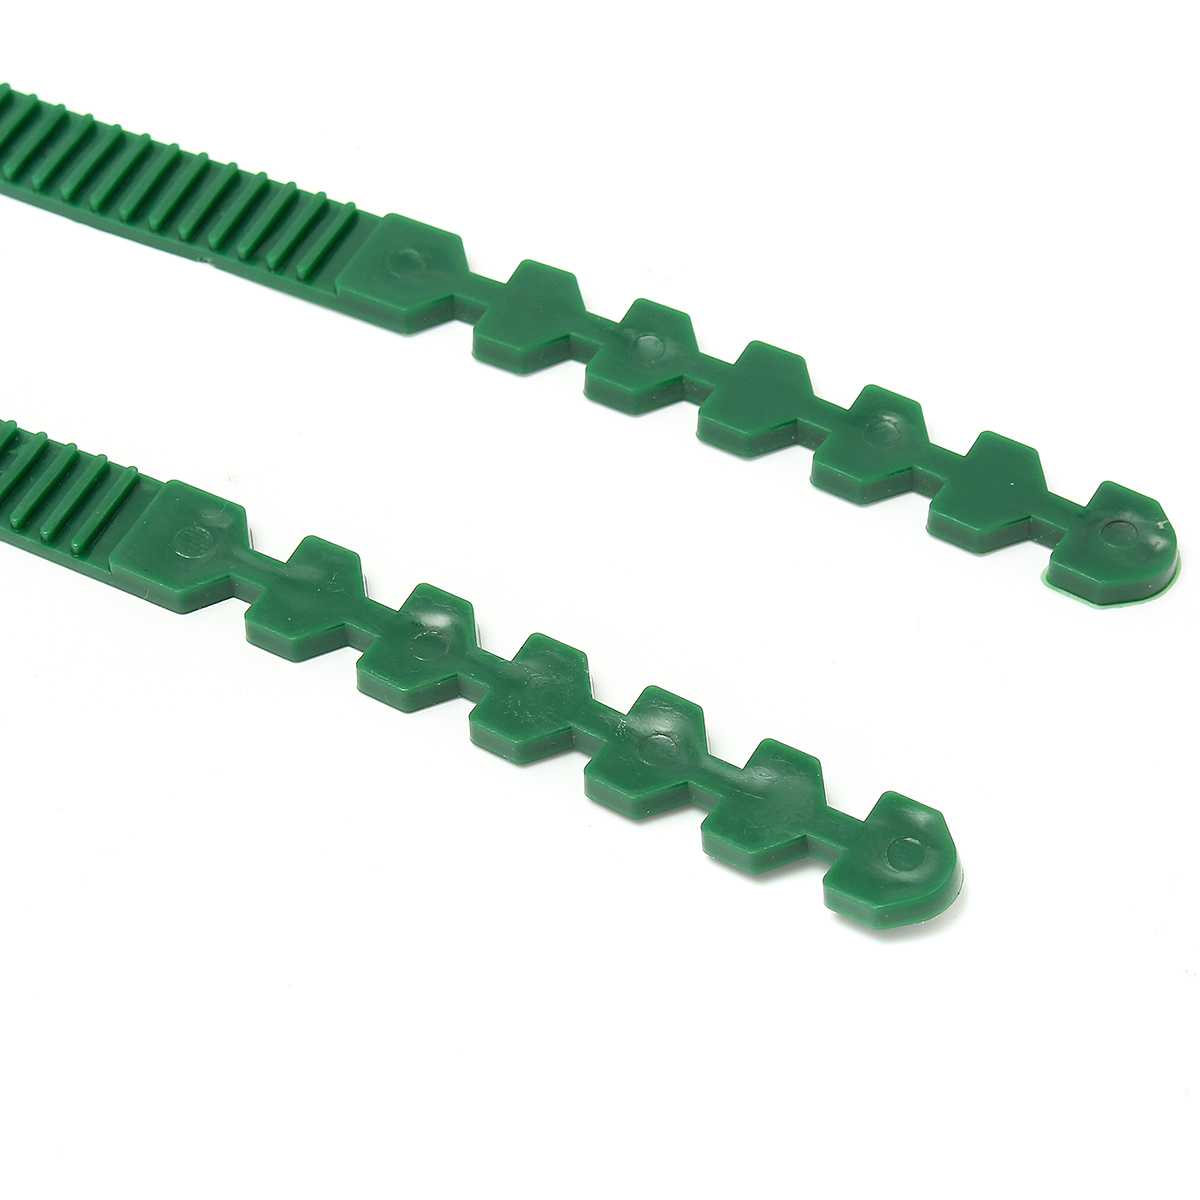 Details about   Reusable Gardens Plastic Plant Cable Ties Adjustable Trees Climbing Support.